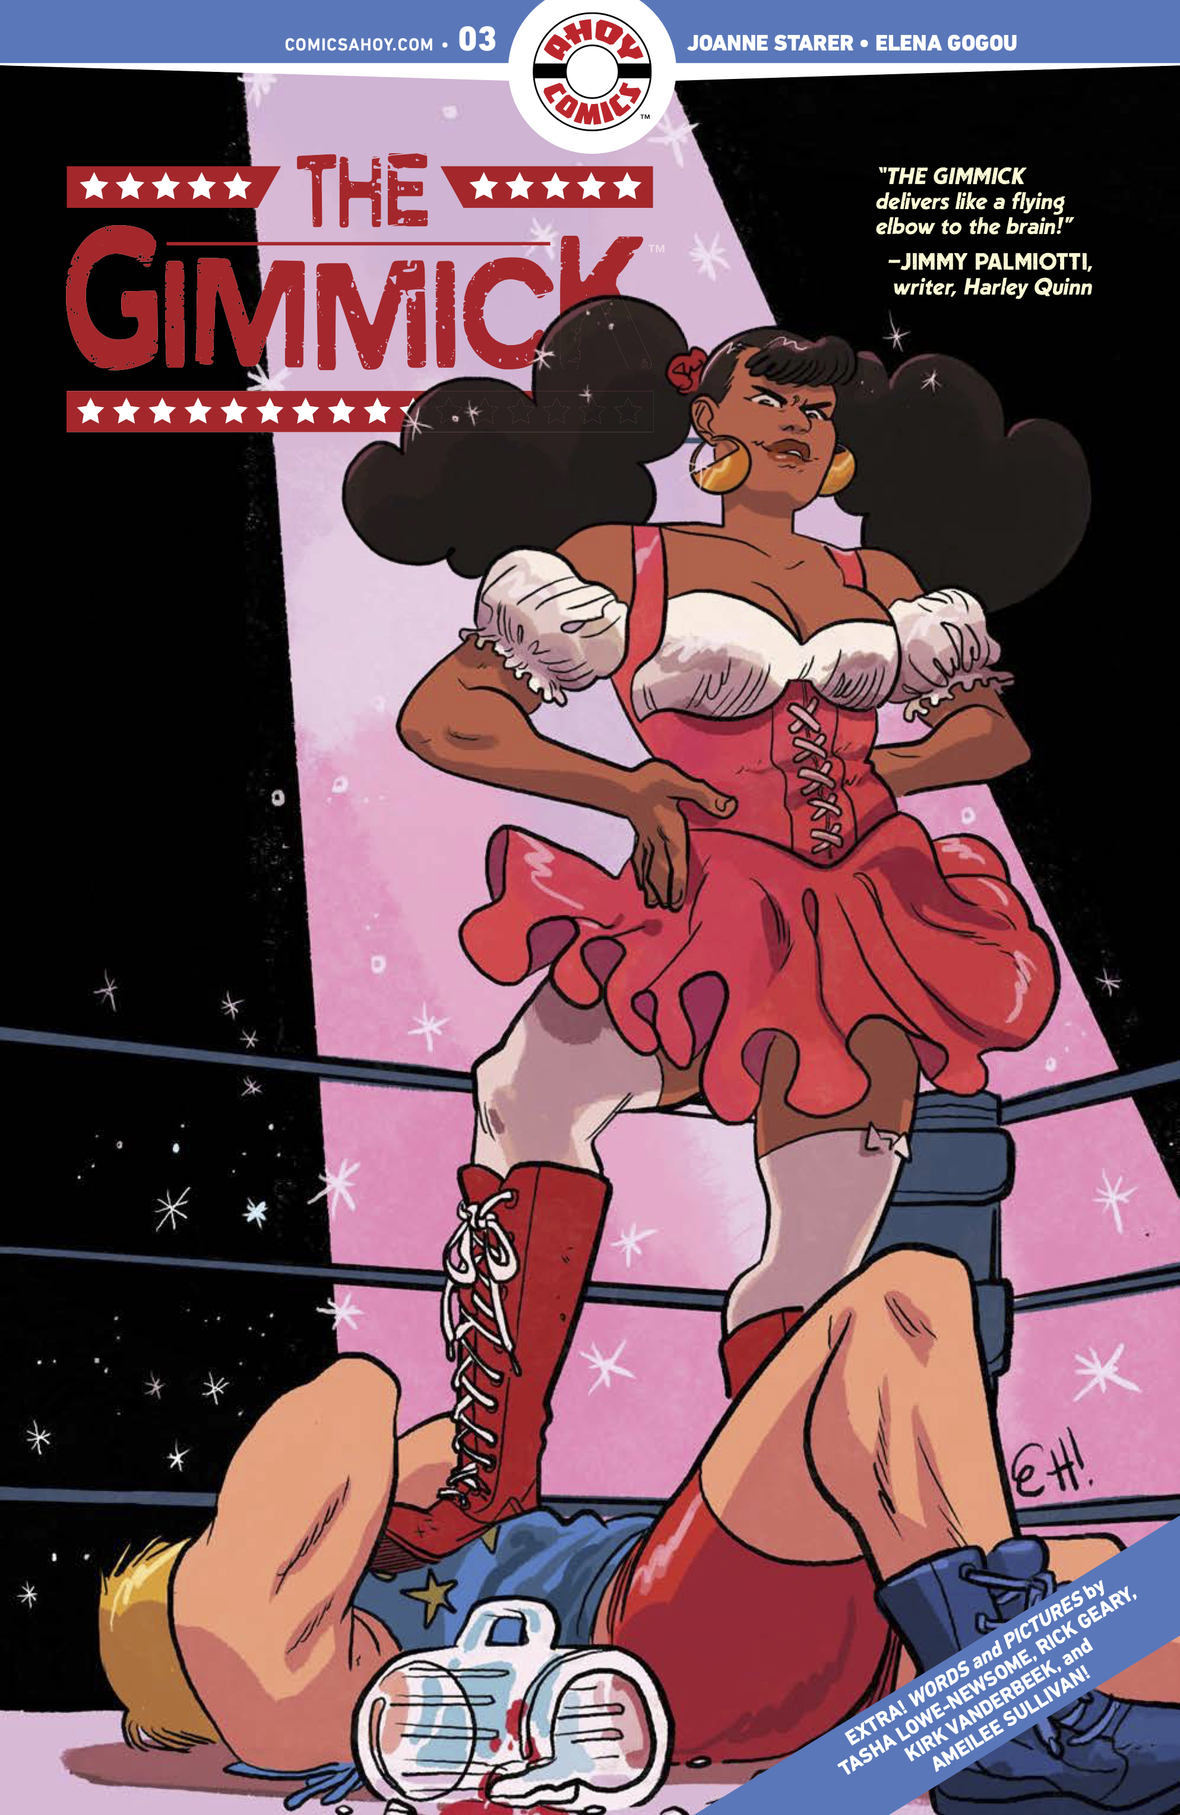 The Gimmick #3 main cover